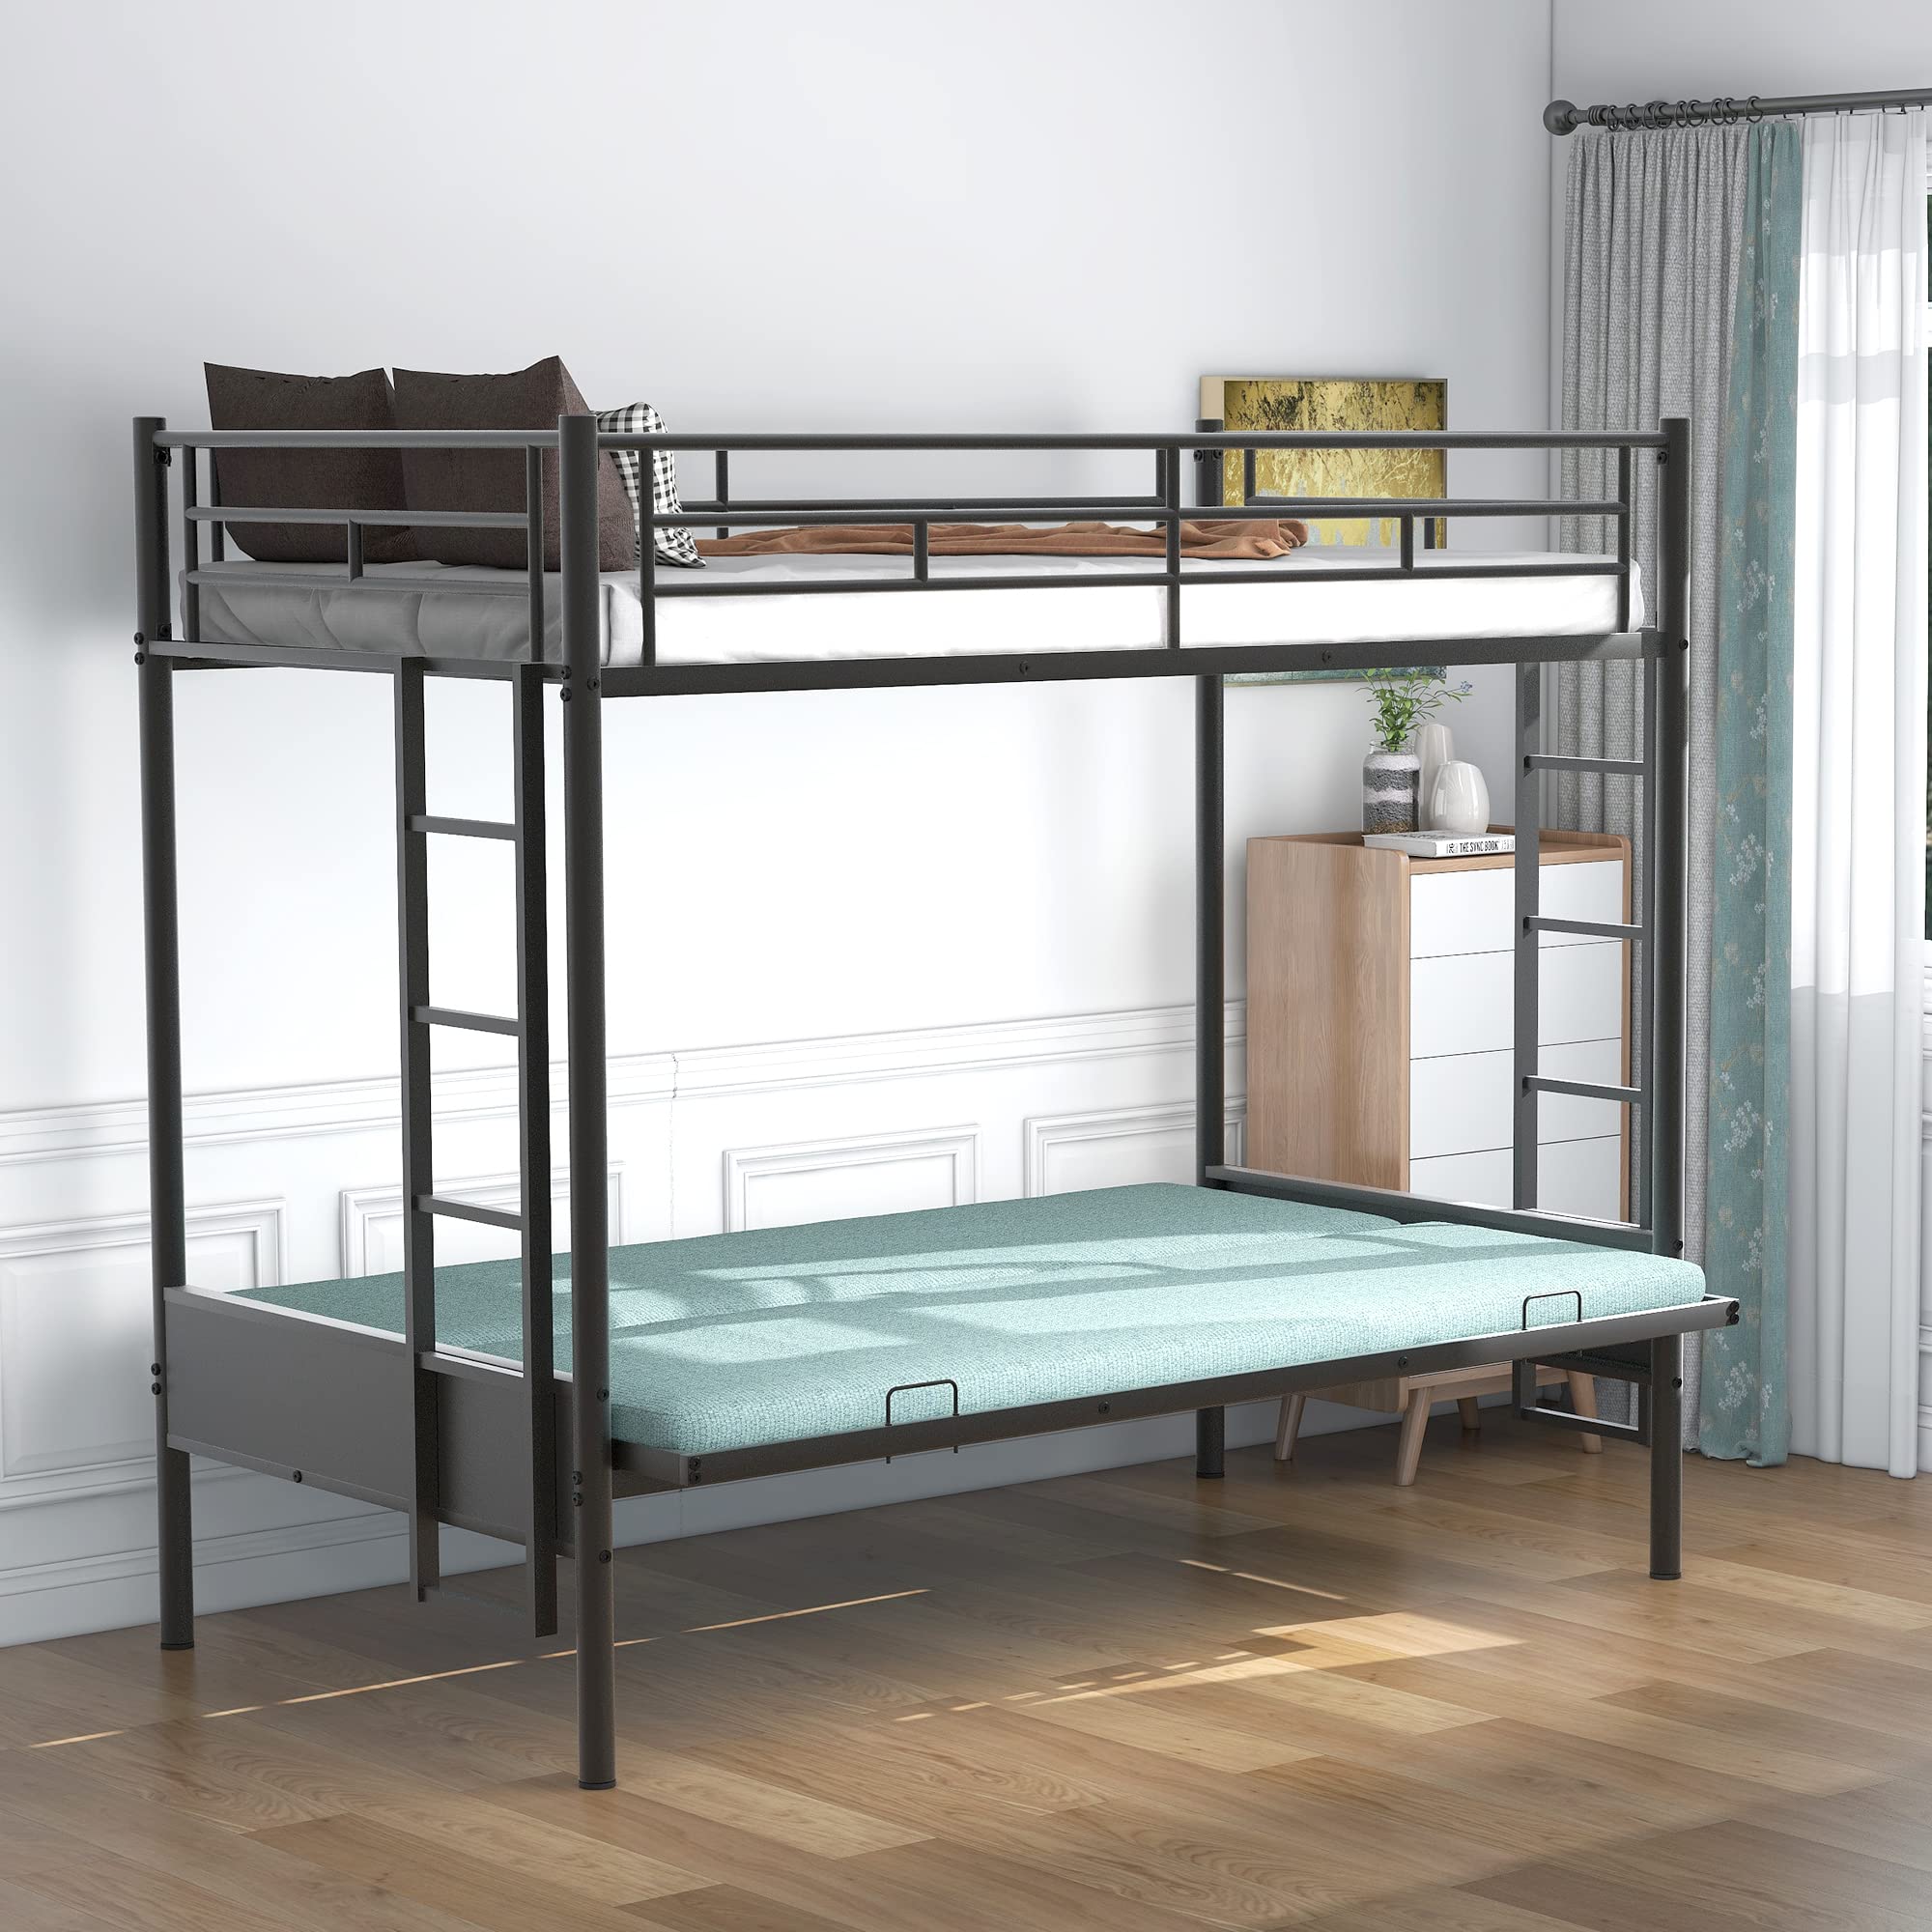 SOFTSEA Twin Over Twin Metal Bunk Bed for Kids Industrial Twin Over Futon Bunk Beds with Two Side Ladders and Full-Length guardr